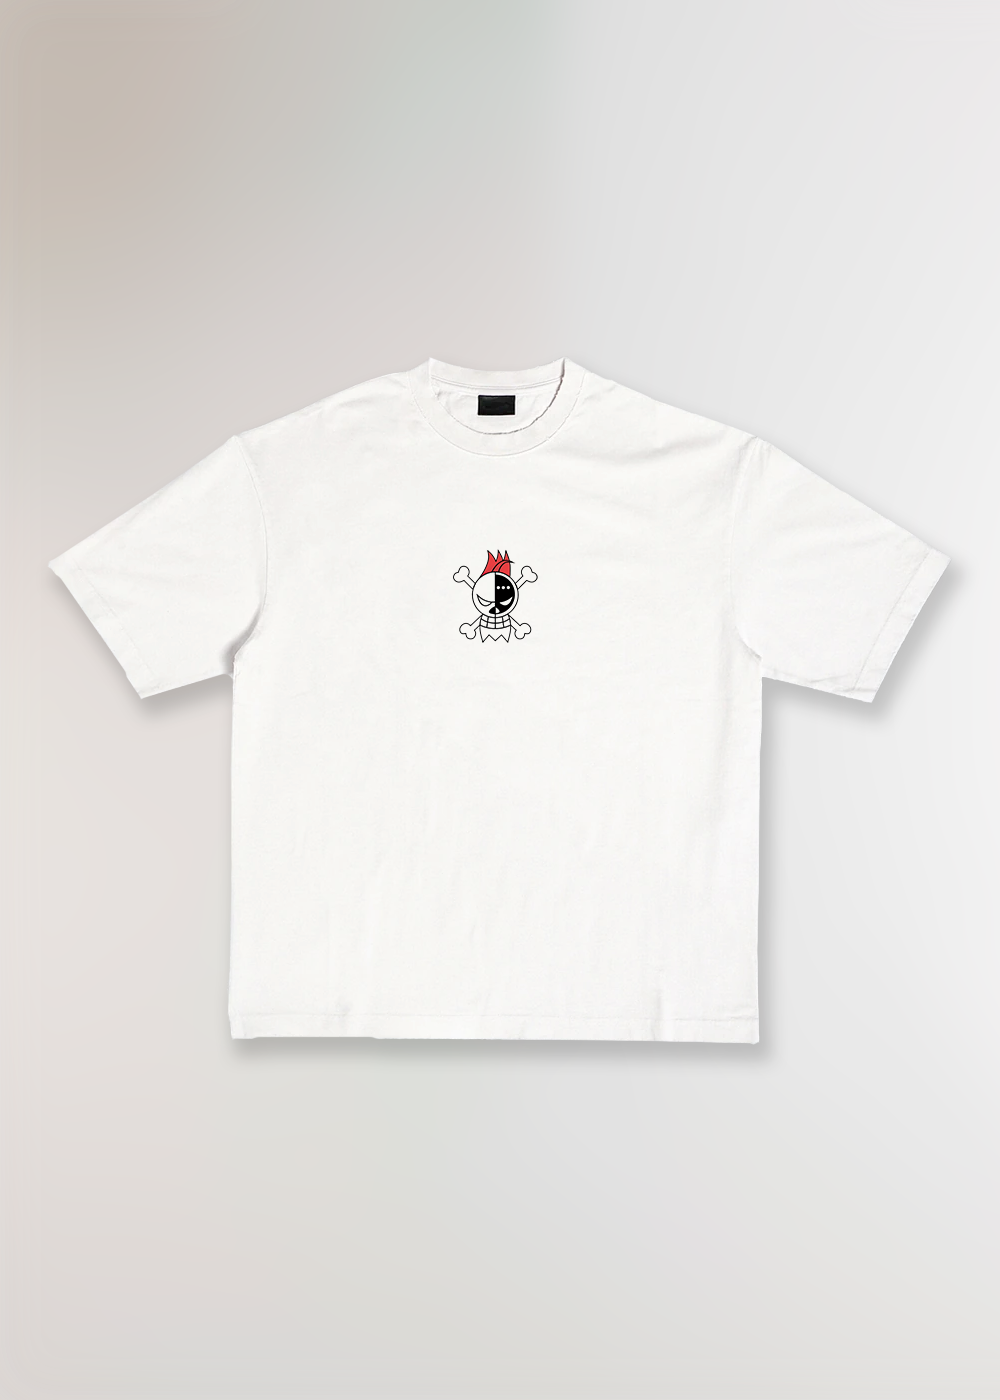 MADE IN JAPAN - CYBORG® WHITE T-SHIRT